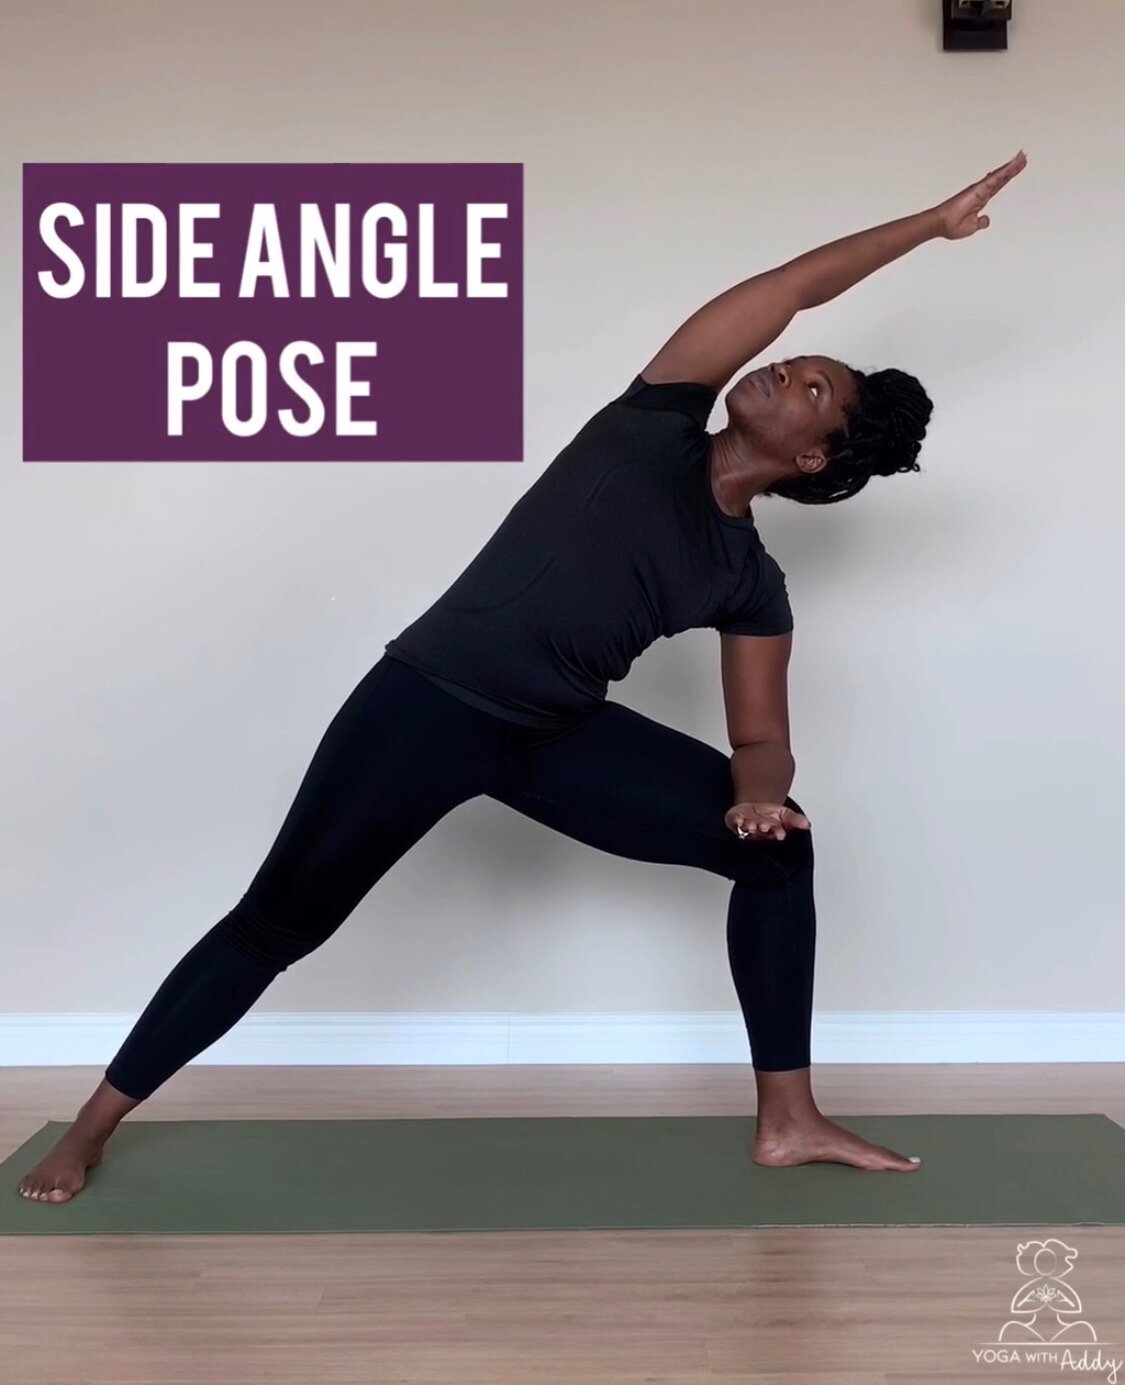 5 Yoga Poses to Release Tension - MPG Sport Canada